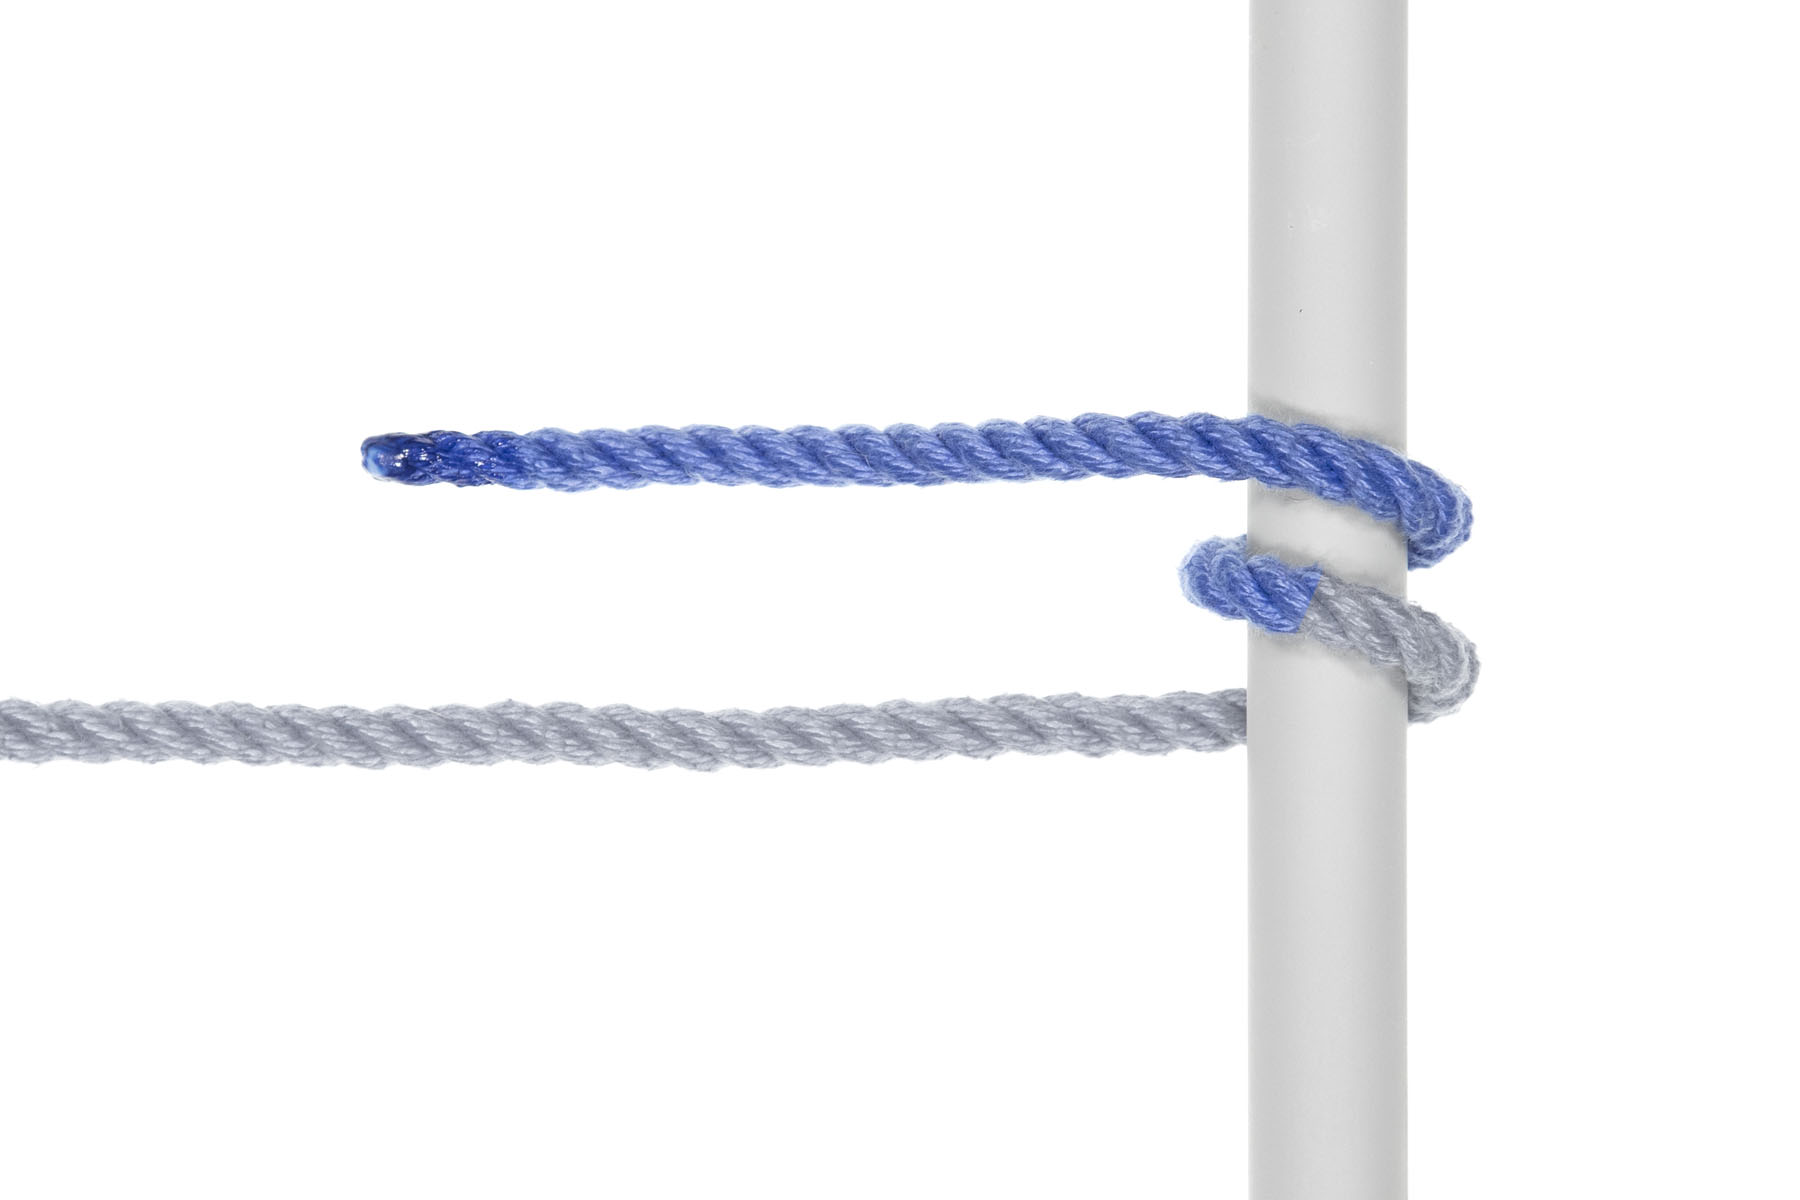 The rope wraps once around the pole, moving upward. It now makes a spiral shape going up the pole, with the end again pointing toward the left.